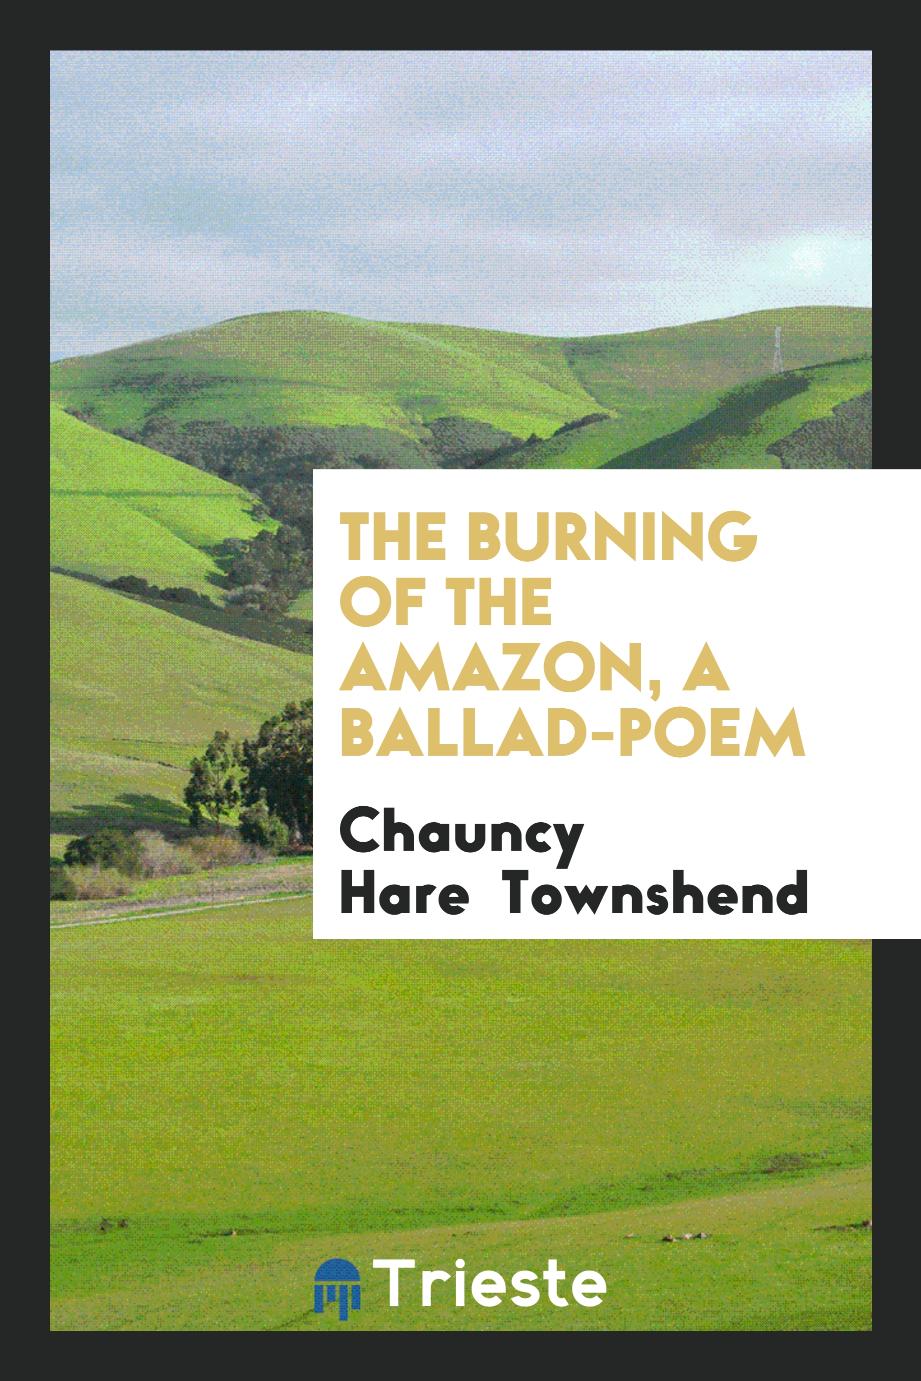 The burning of the Amazon, a ballad-poem